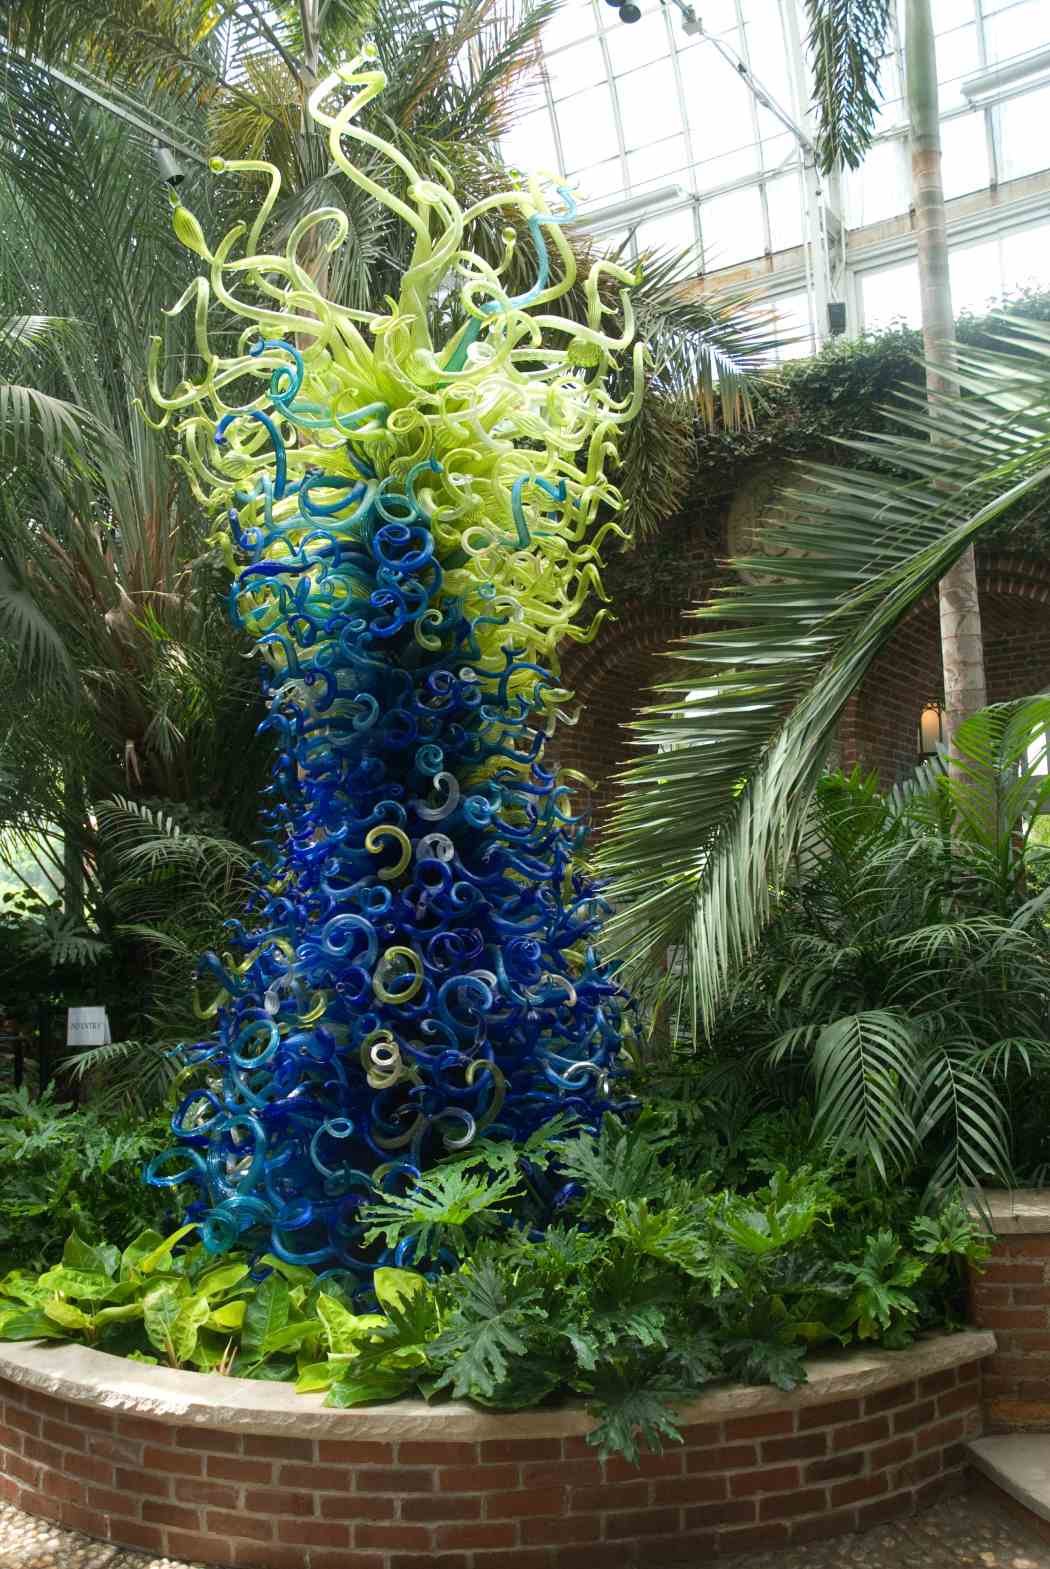 Chihuly at Phipps: Gardens and Glass